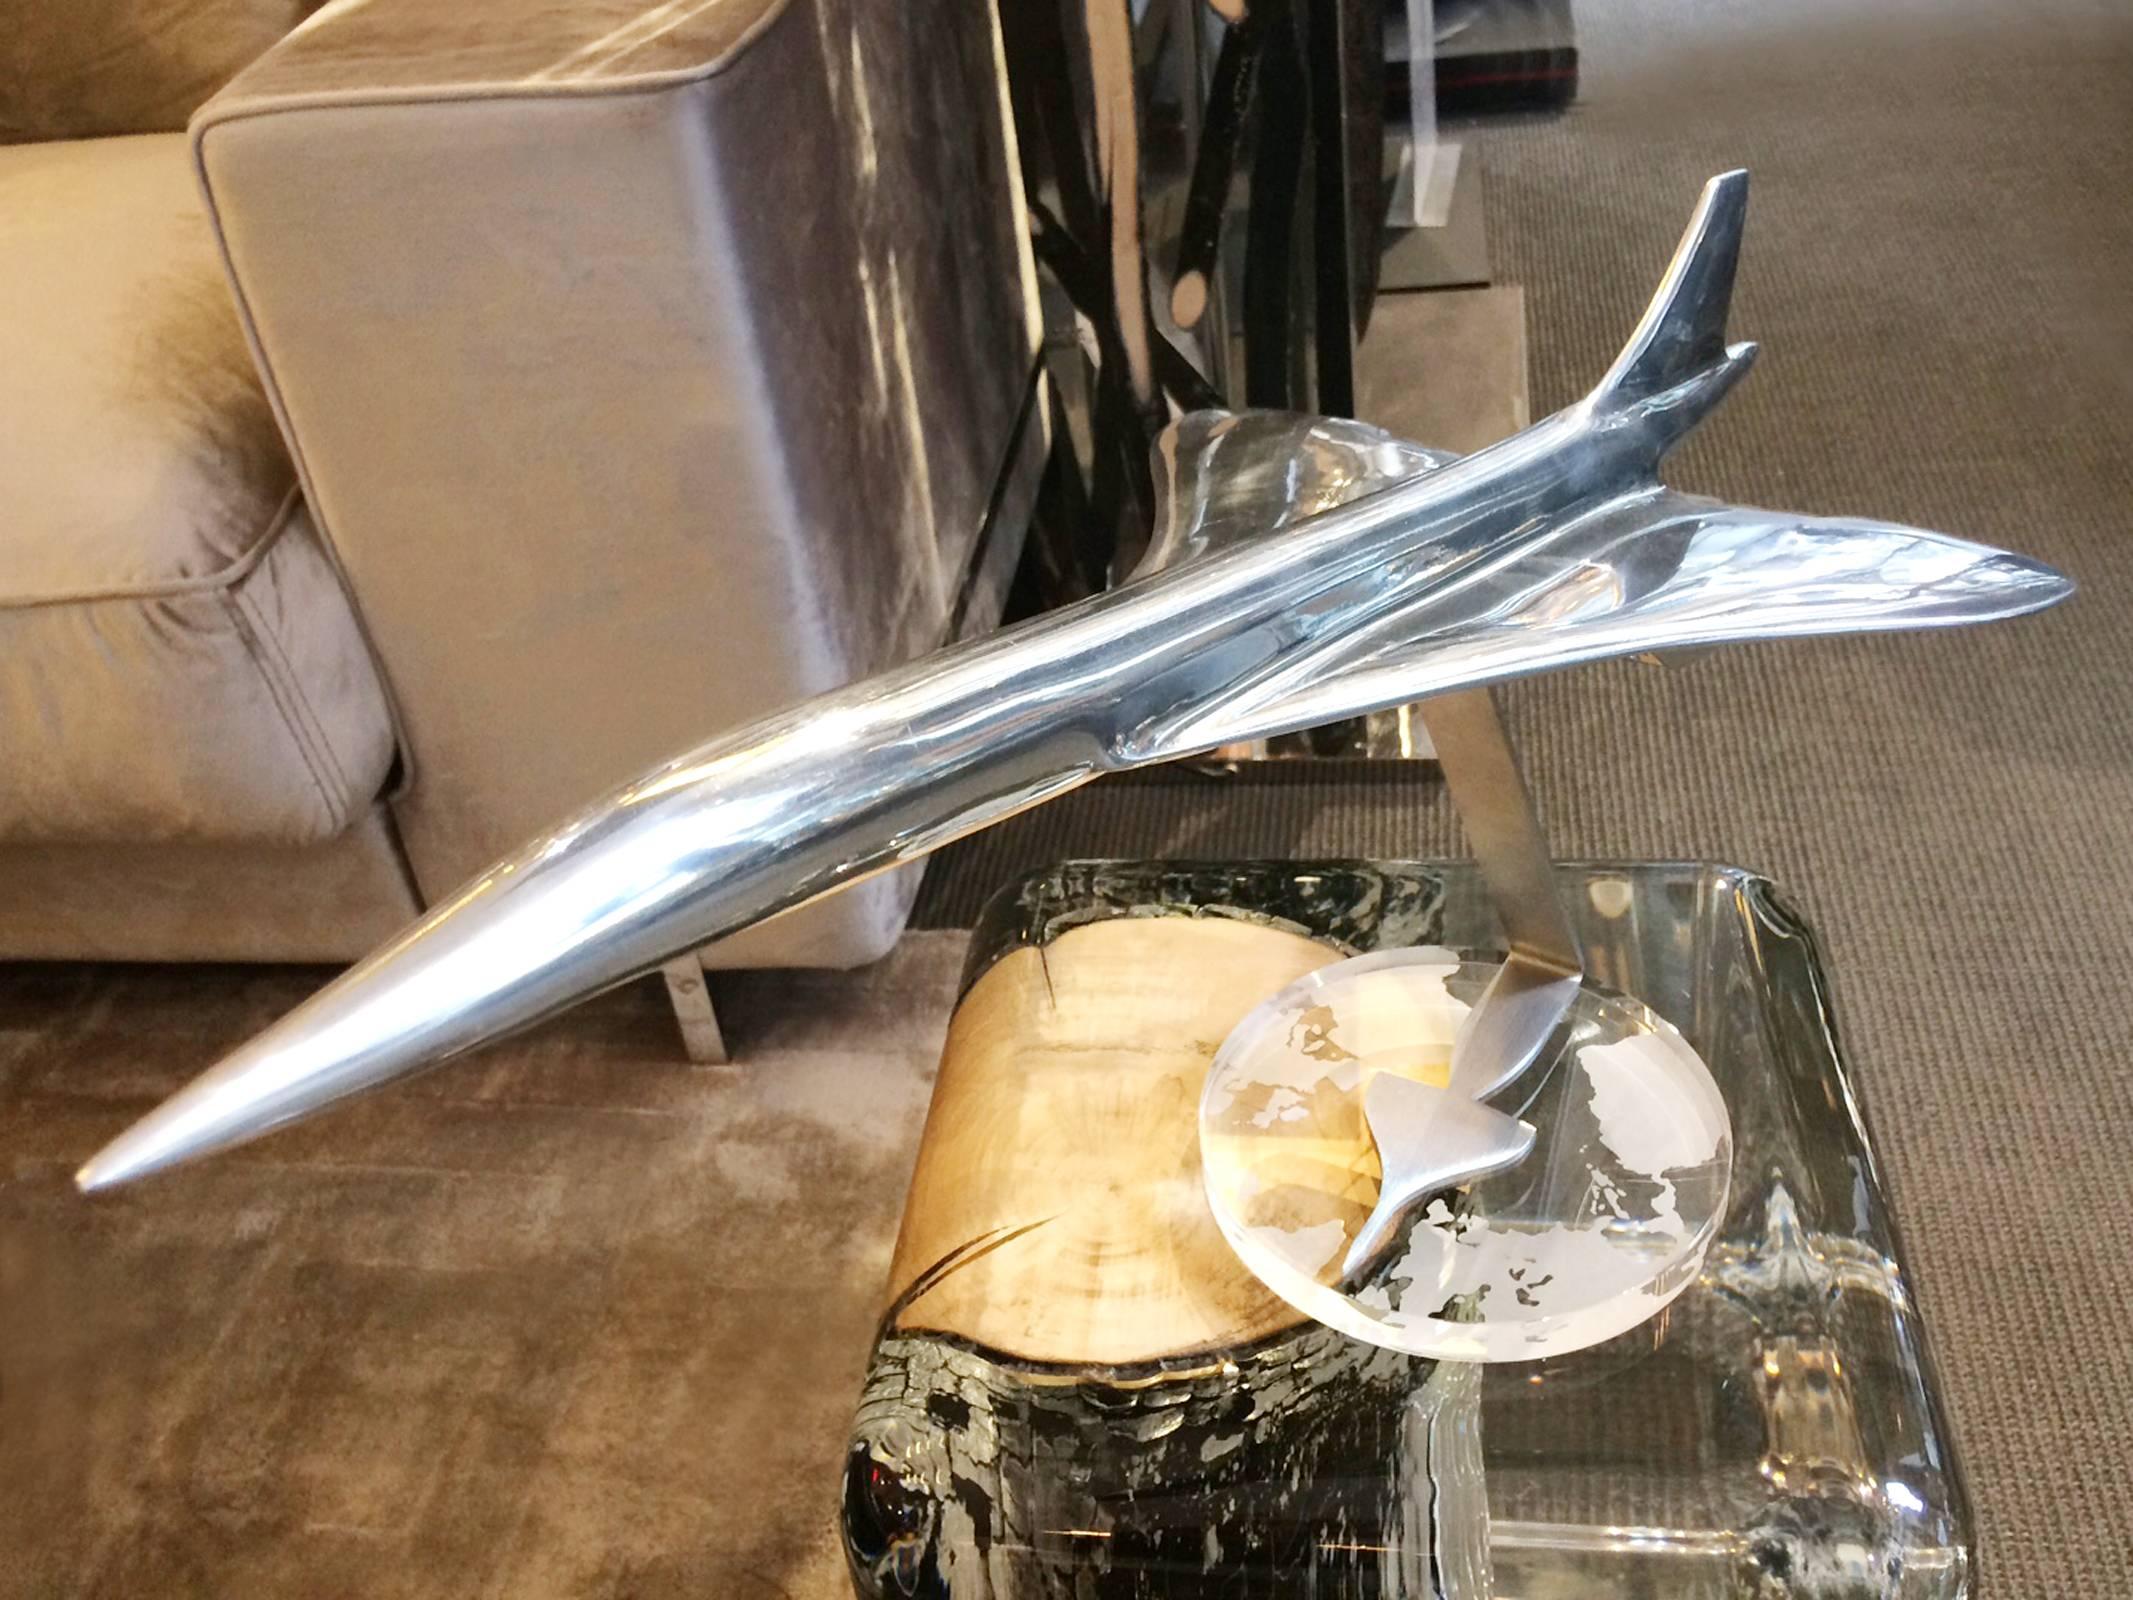 Model Concorde in polished aluminium scale 1/100
on crystal base. Limited edition of 20 pieces.
The Concorde is a supersonic airliner built by the South
Aviation Association (now aerospace) and the British Aircraft
Corporation (later British